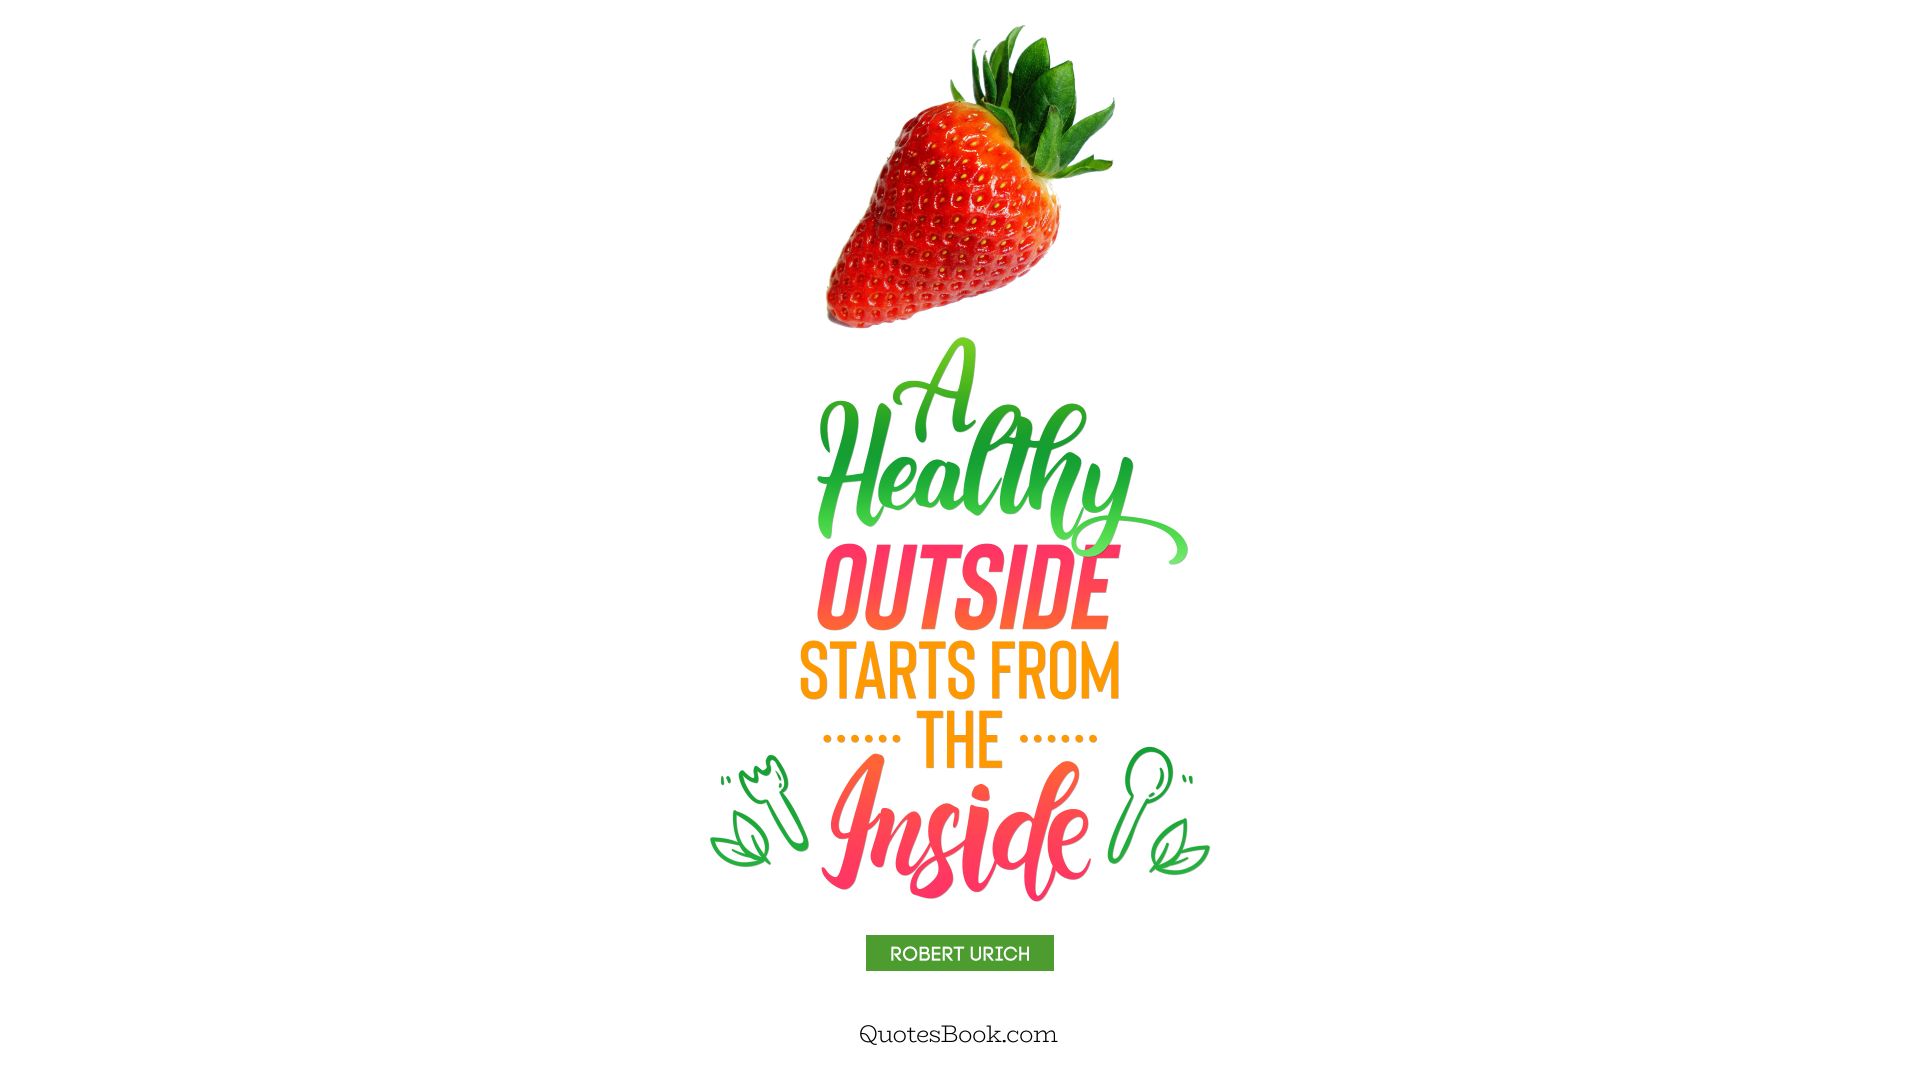 A healthy outside starts from the inside. - Quote by Robert Urich